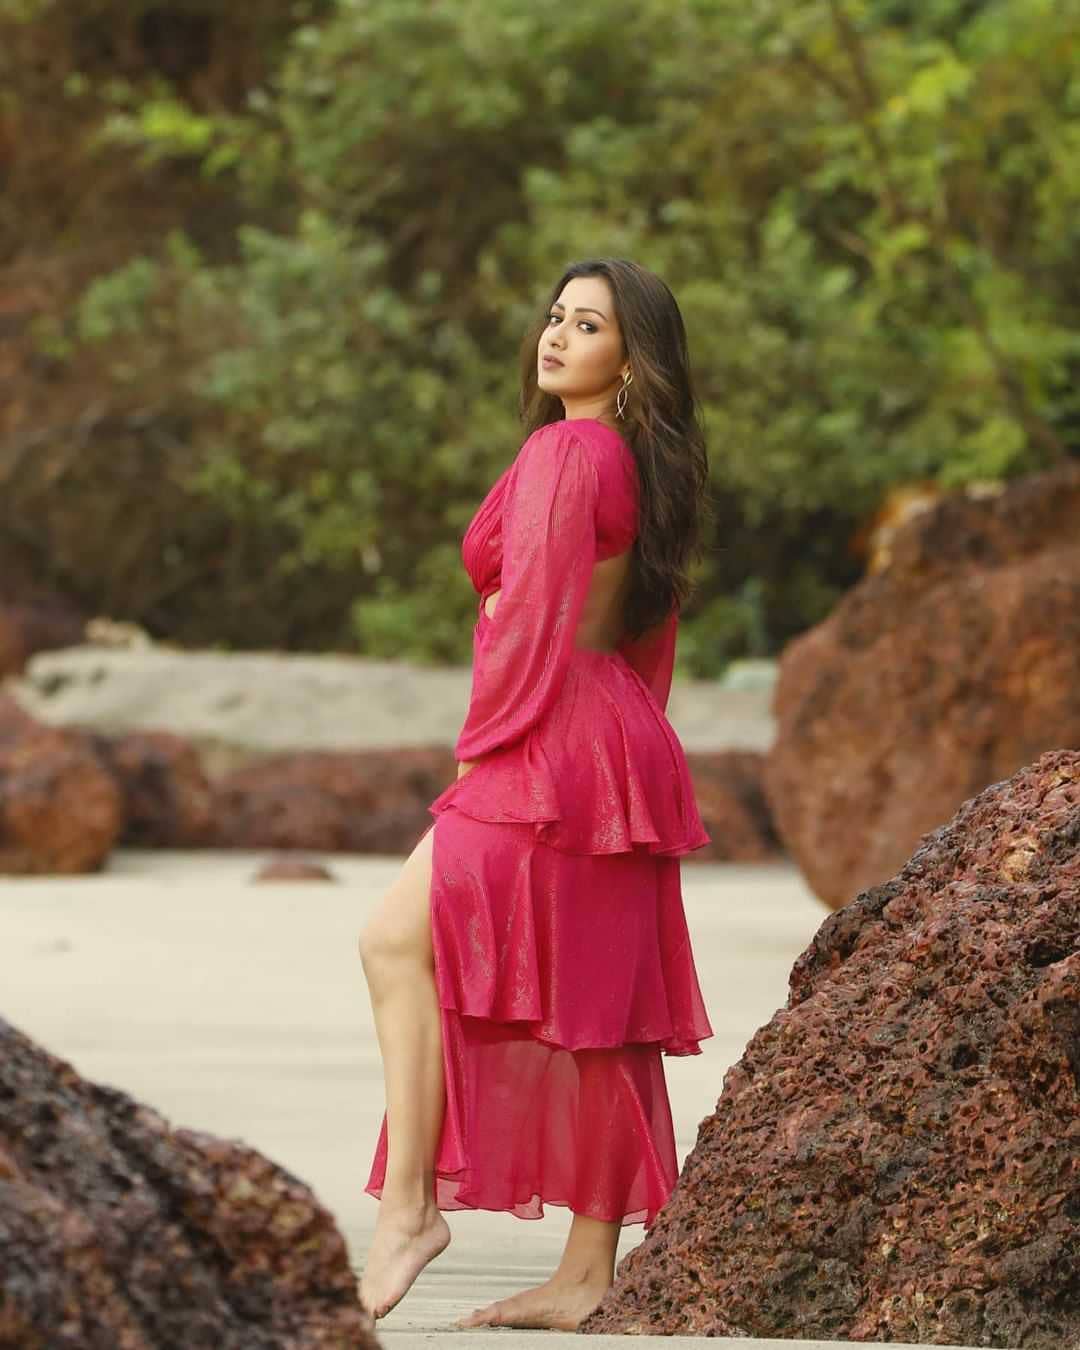 Catherine Tresa Alexander Photoshoot in Stylish Pink Outfit at Beach, December 2021 2